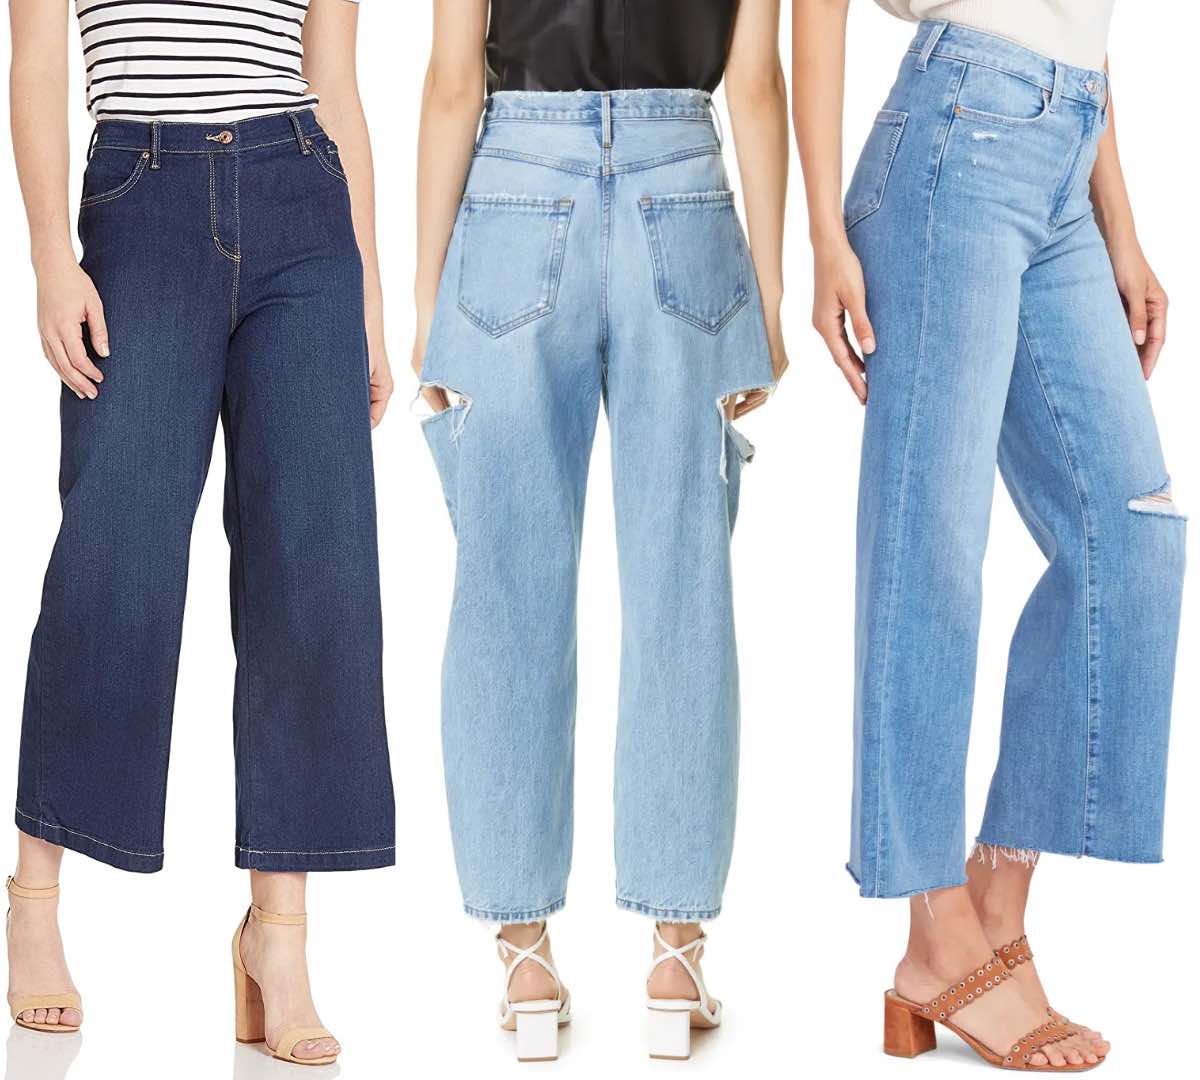 3 women wearing different chunky heeled sandals with wide leg jeans.